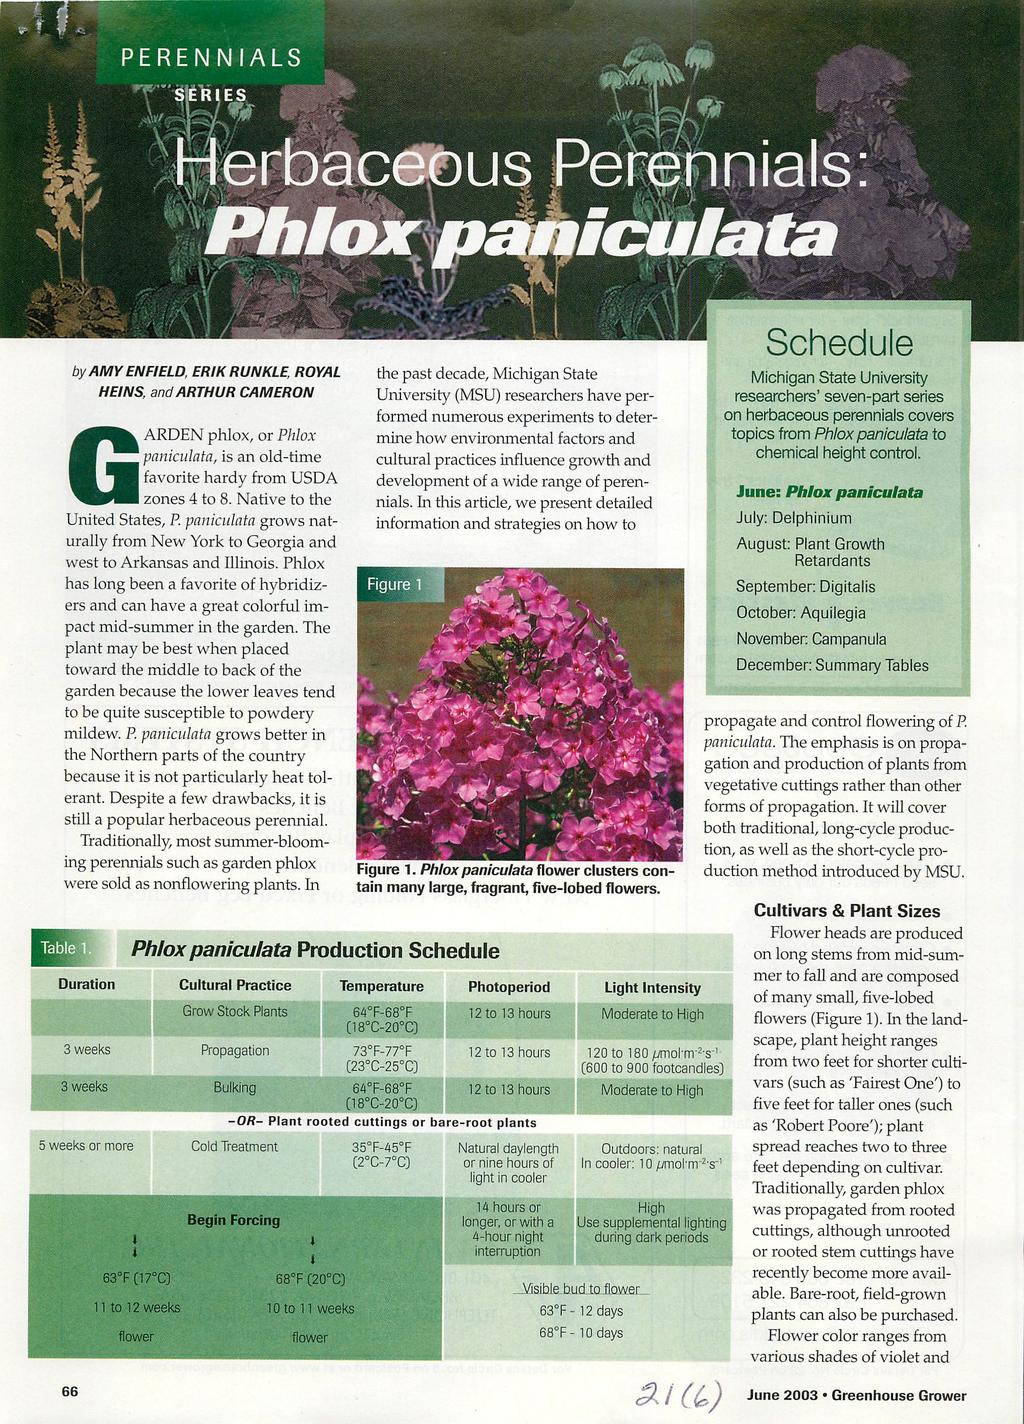 Herbaceous Perennials: Phlox paniculata Schedule the past decade, Michigan State University (MSU) researchers have performed numerous experiments to determine how environmental factors and cultural